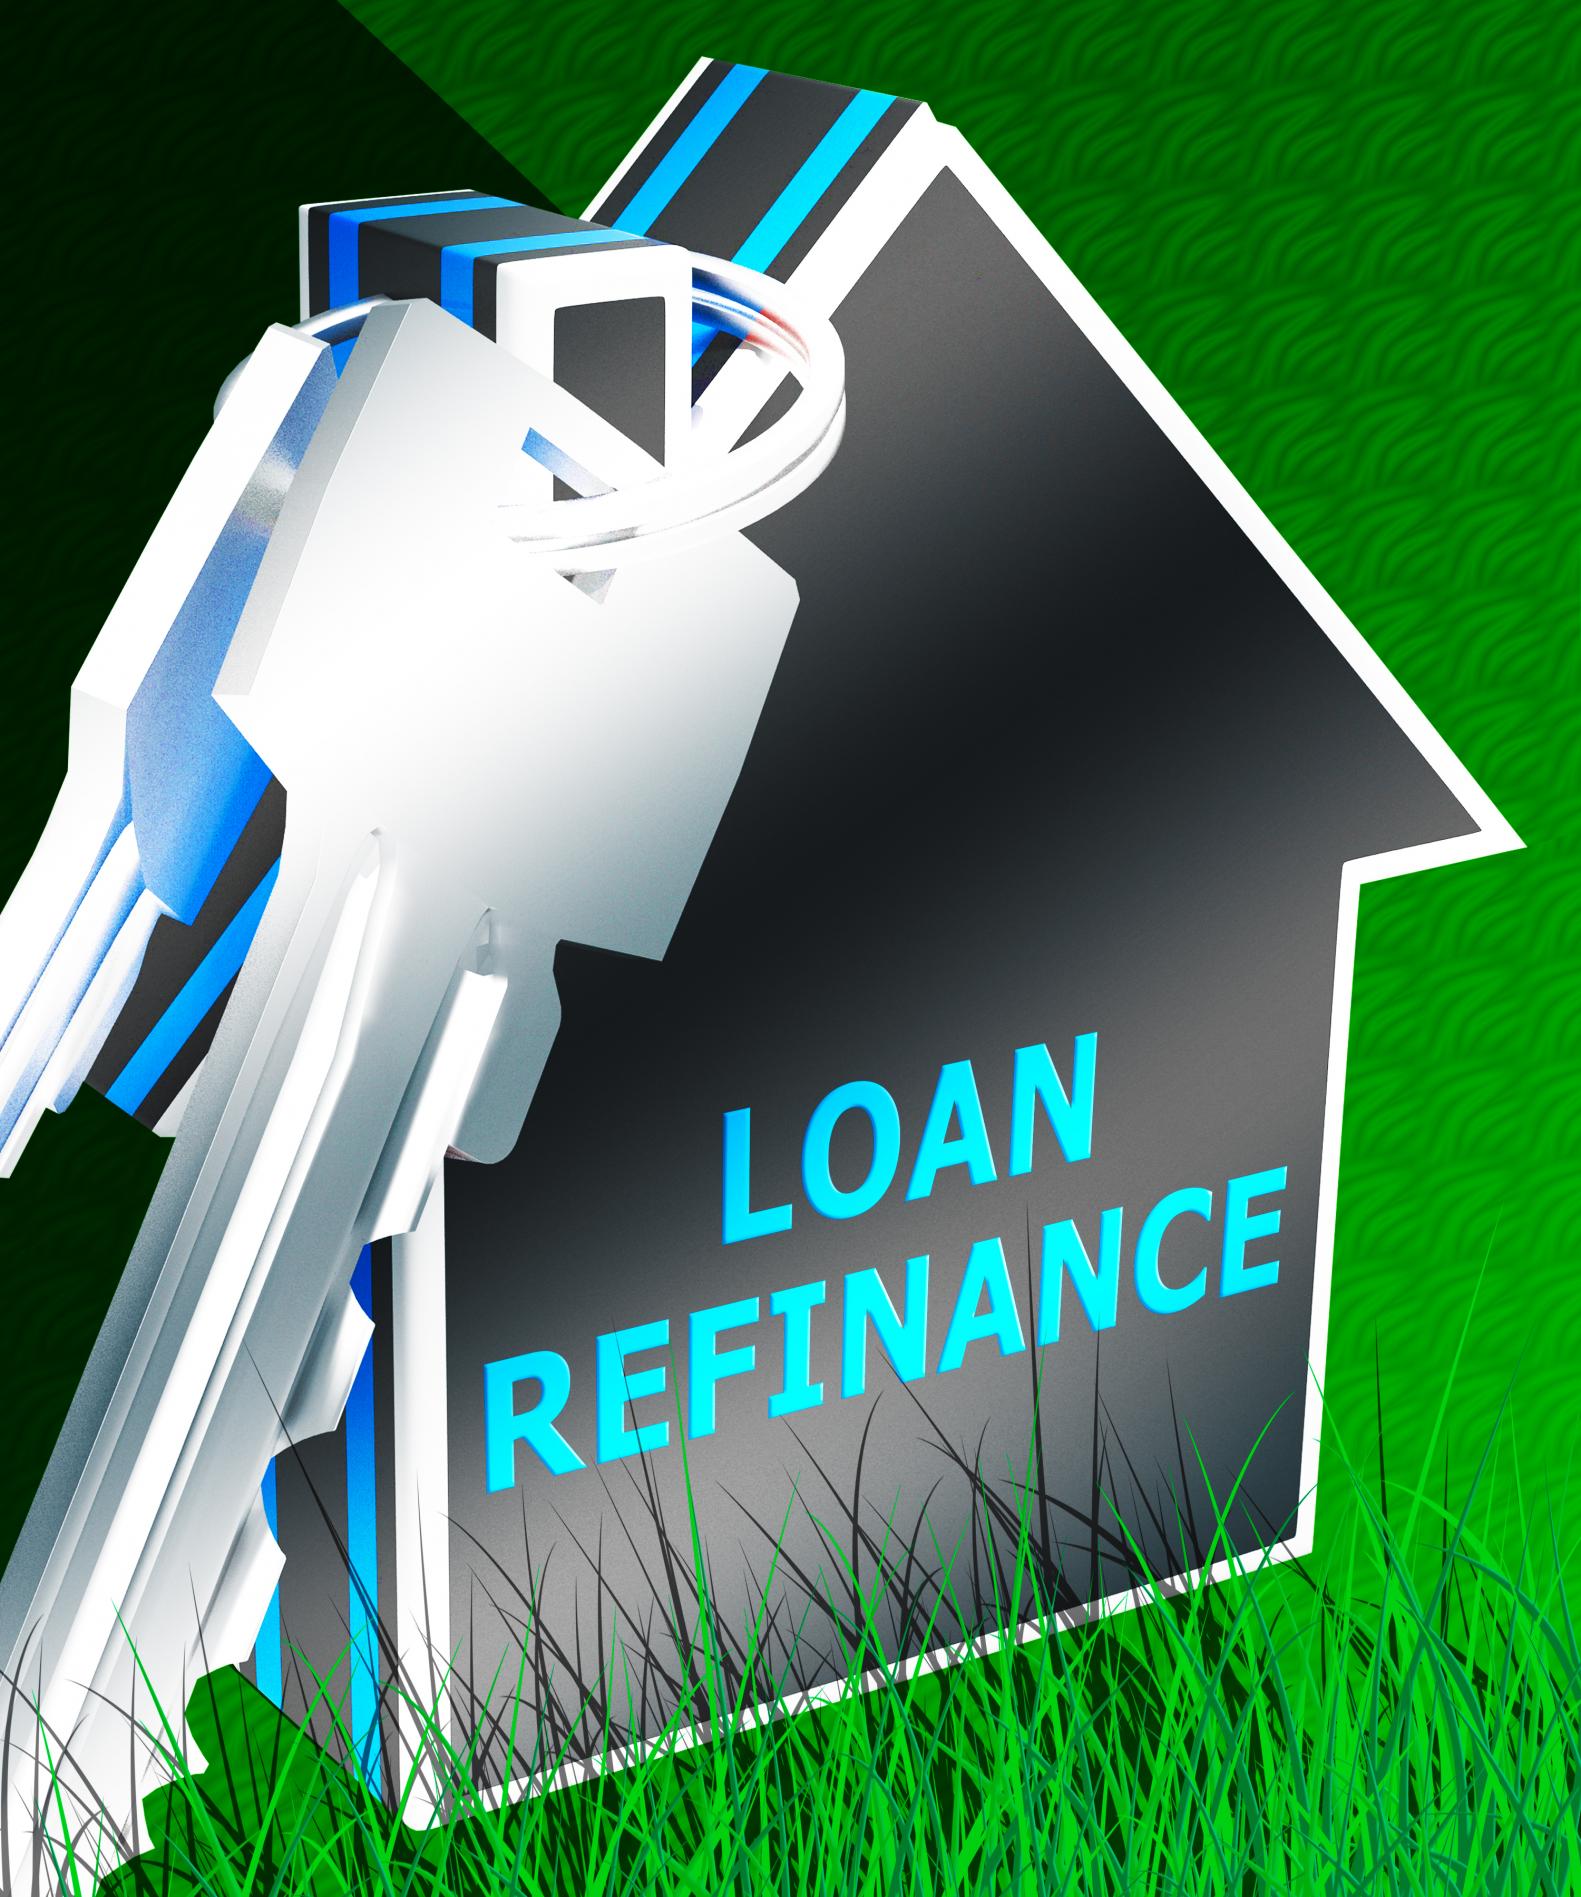 Tips on Refinancing Your Mortgage